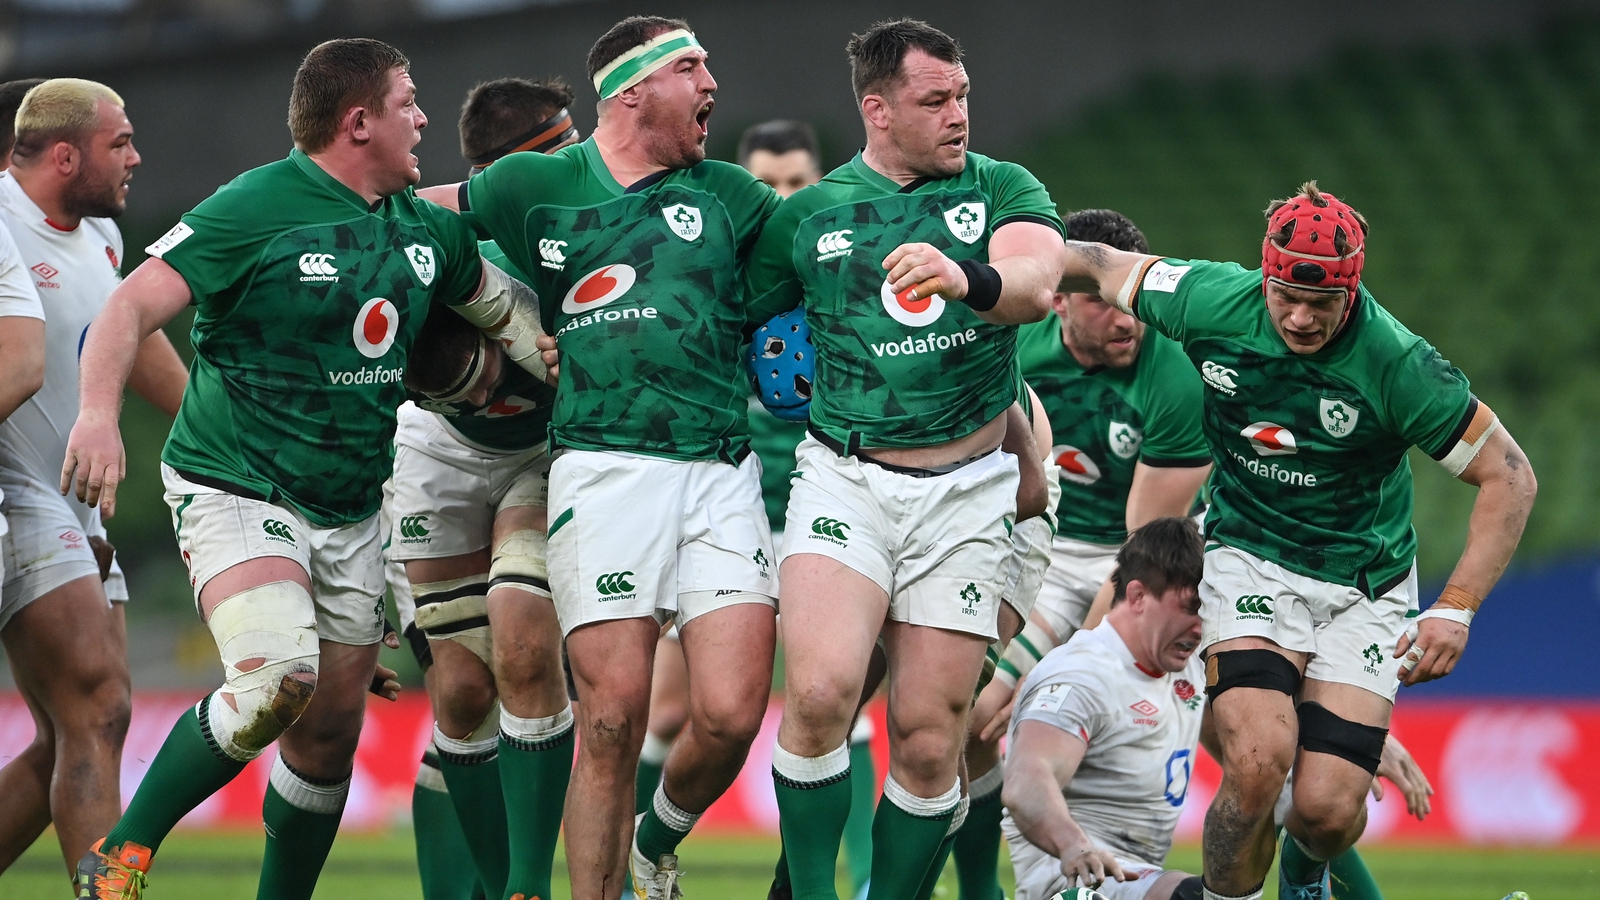 England v Ireland All you need to know